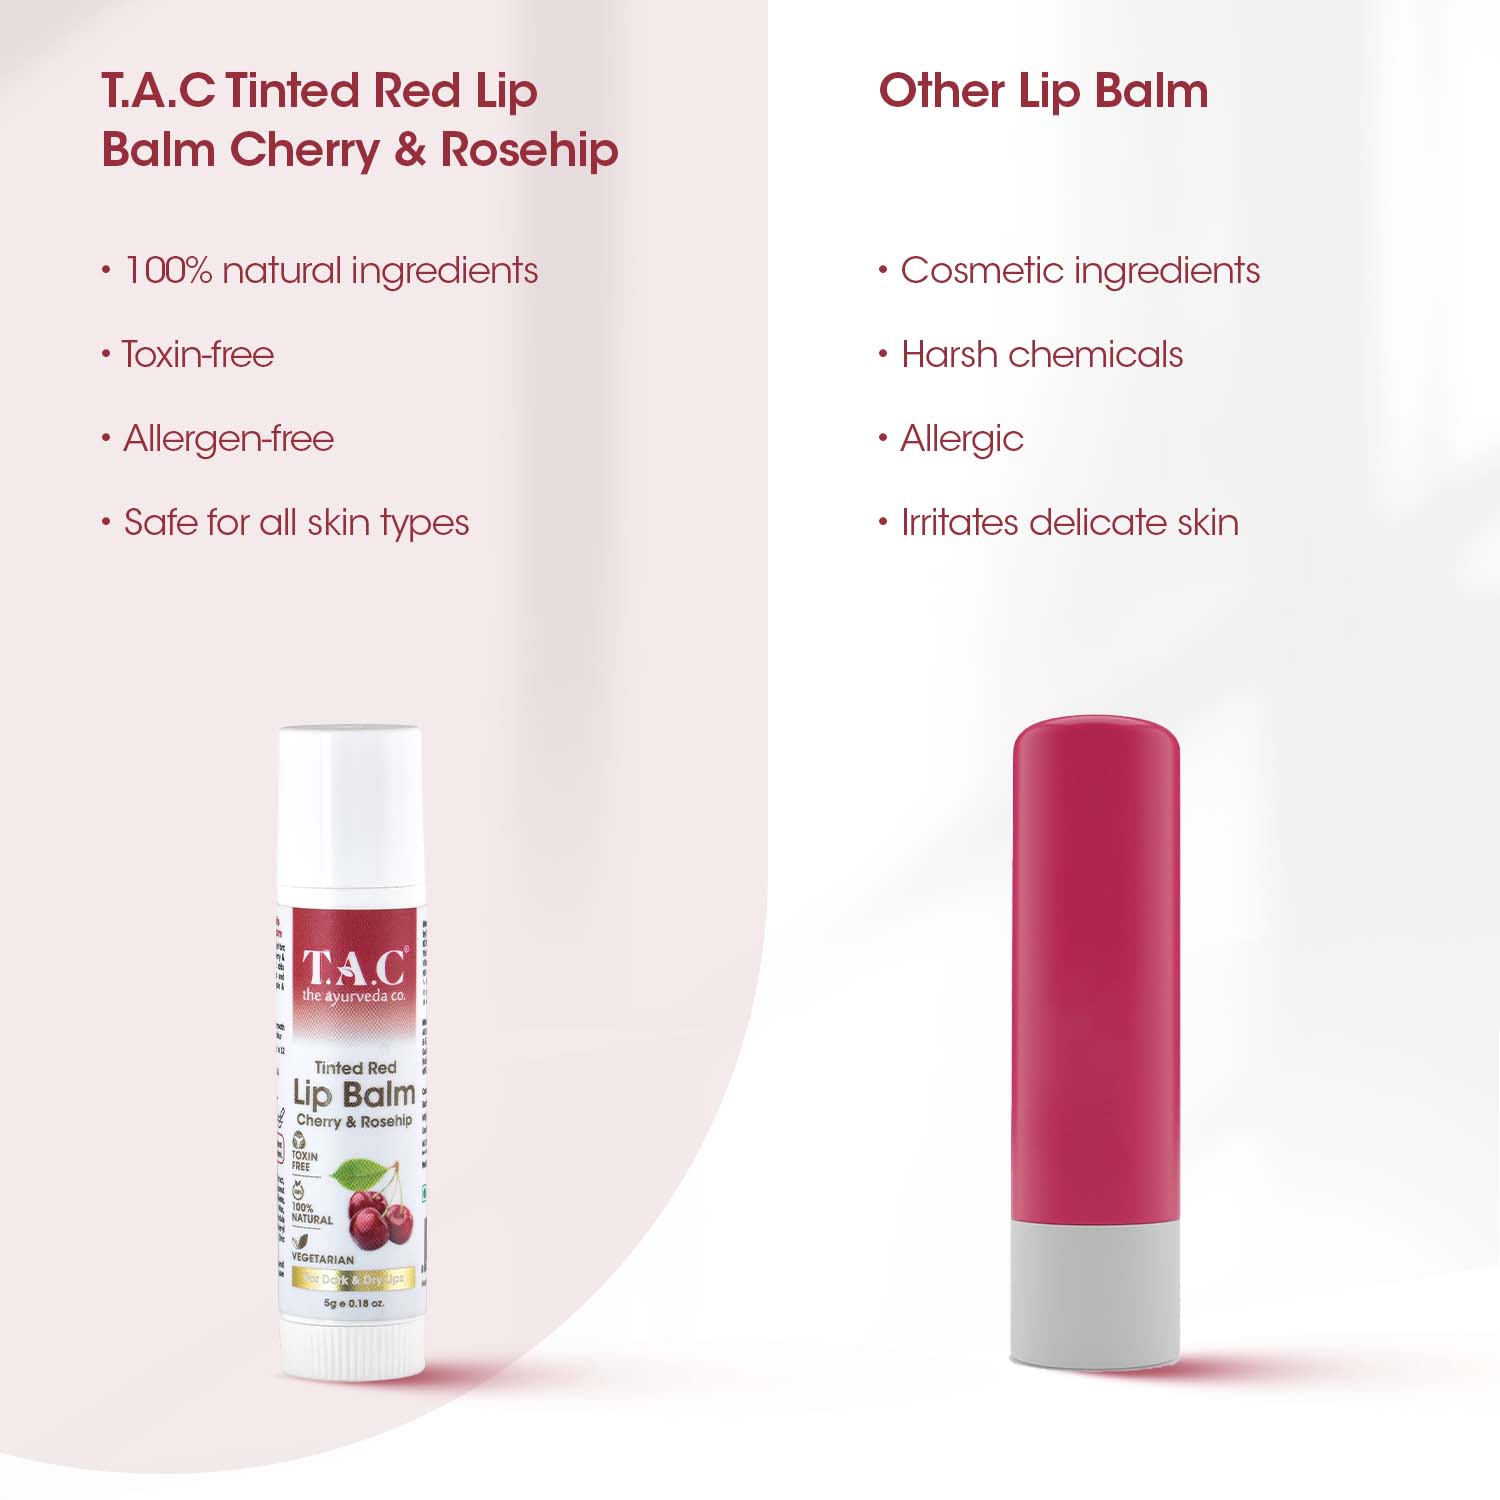 Tinted Red Lip Balm